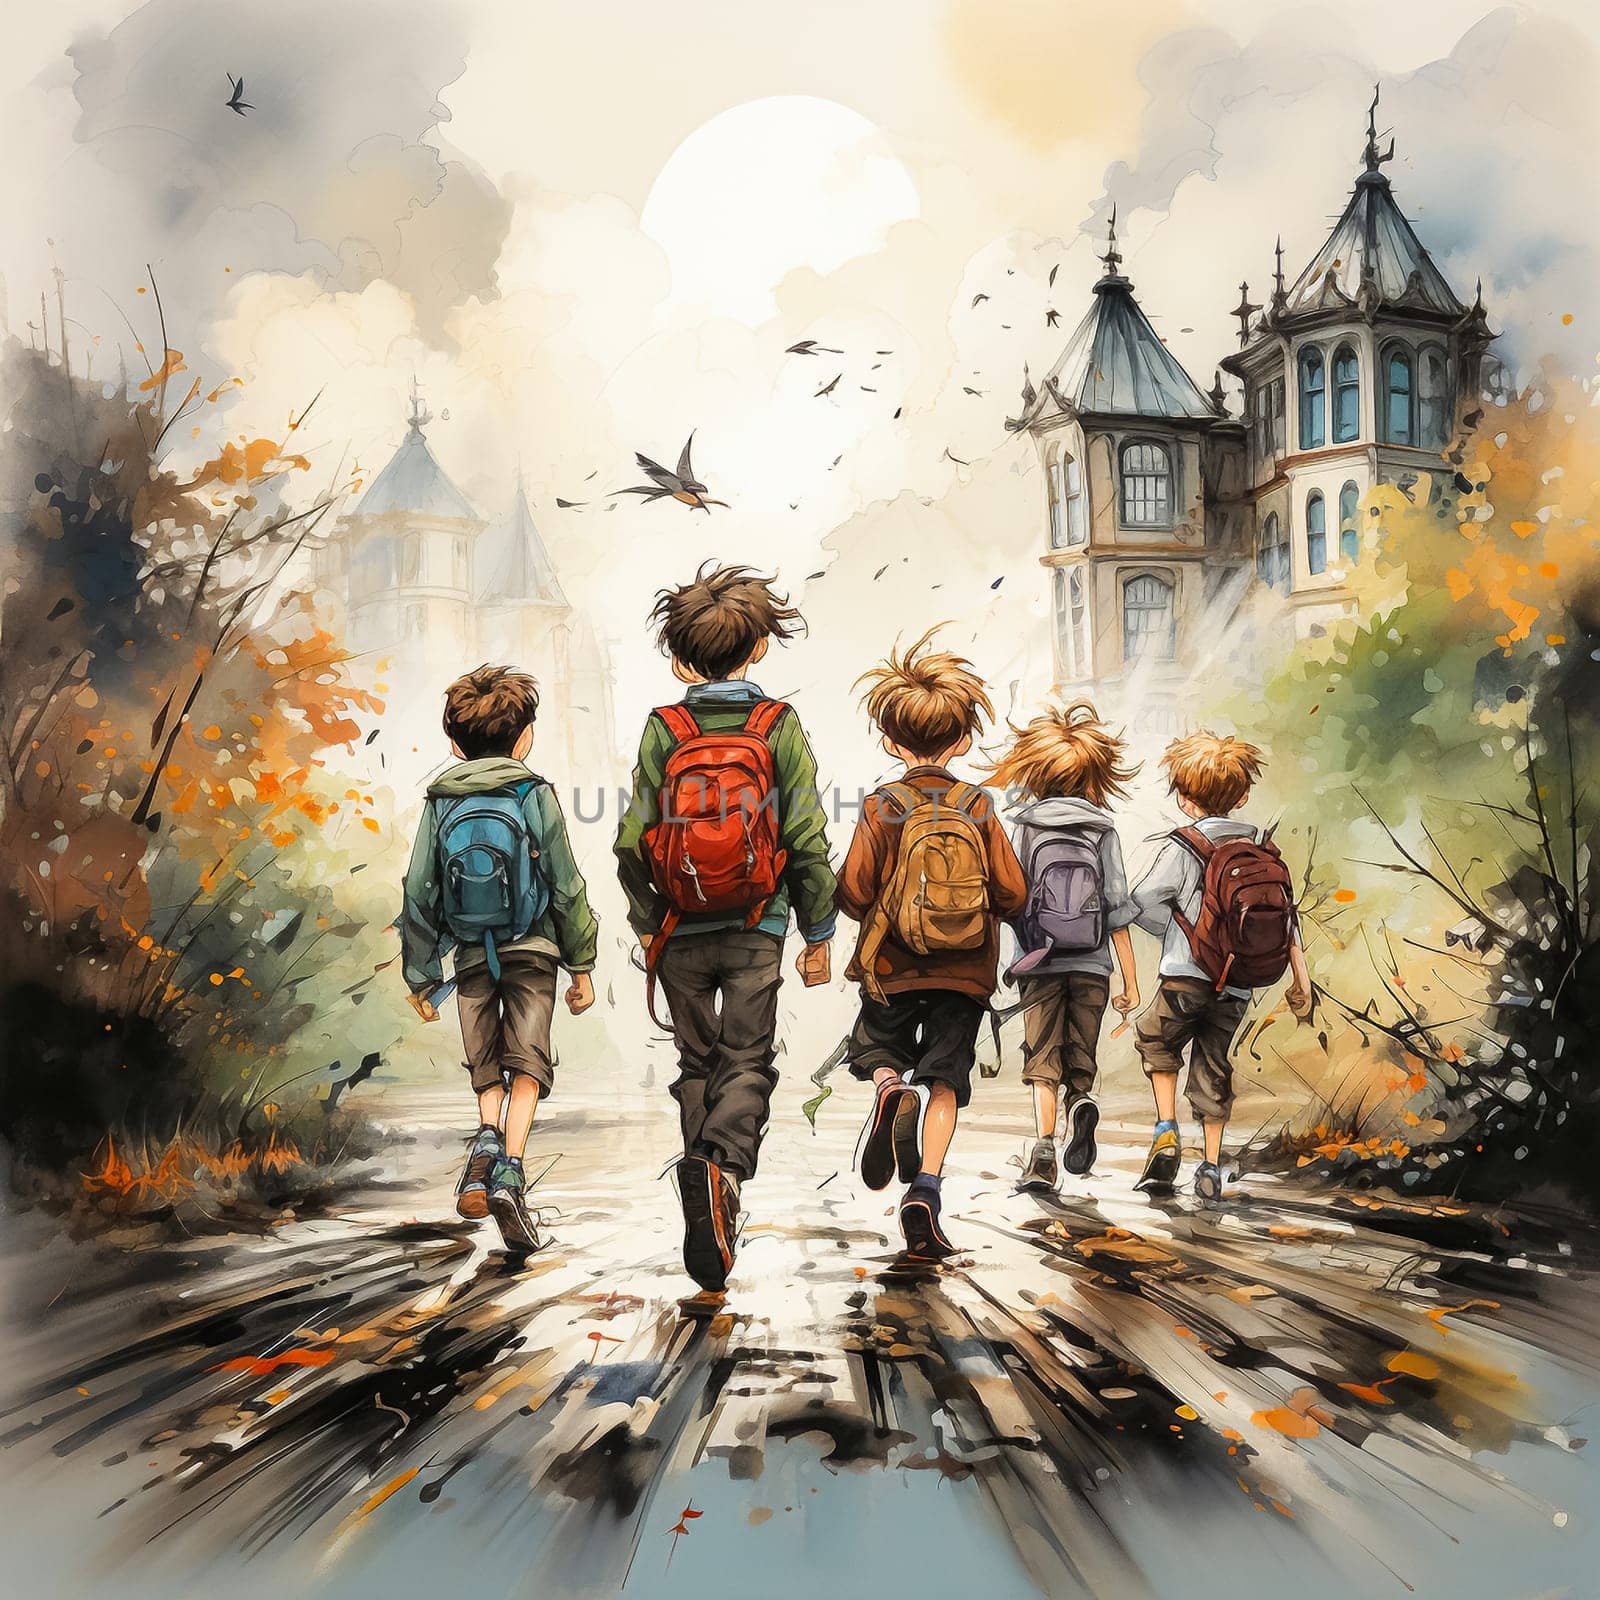 Child returning from school in autumn street landscape. Warm hues capture the essence of a cozy, nostalgic journey